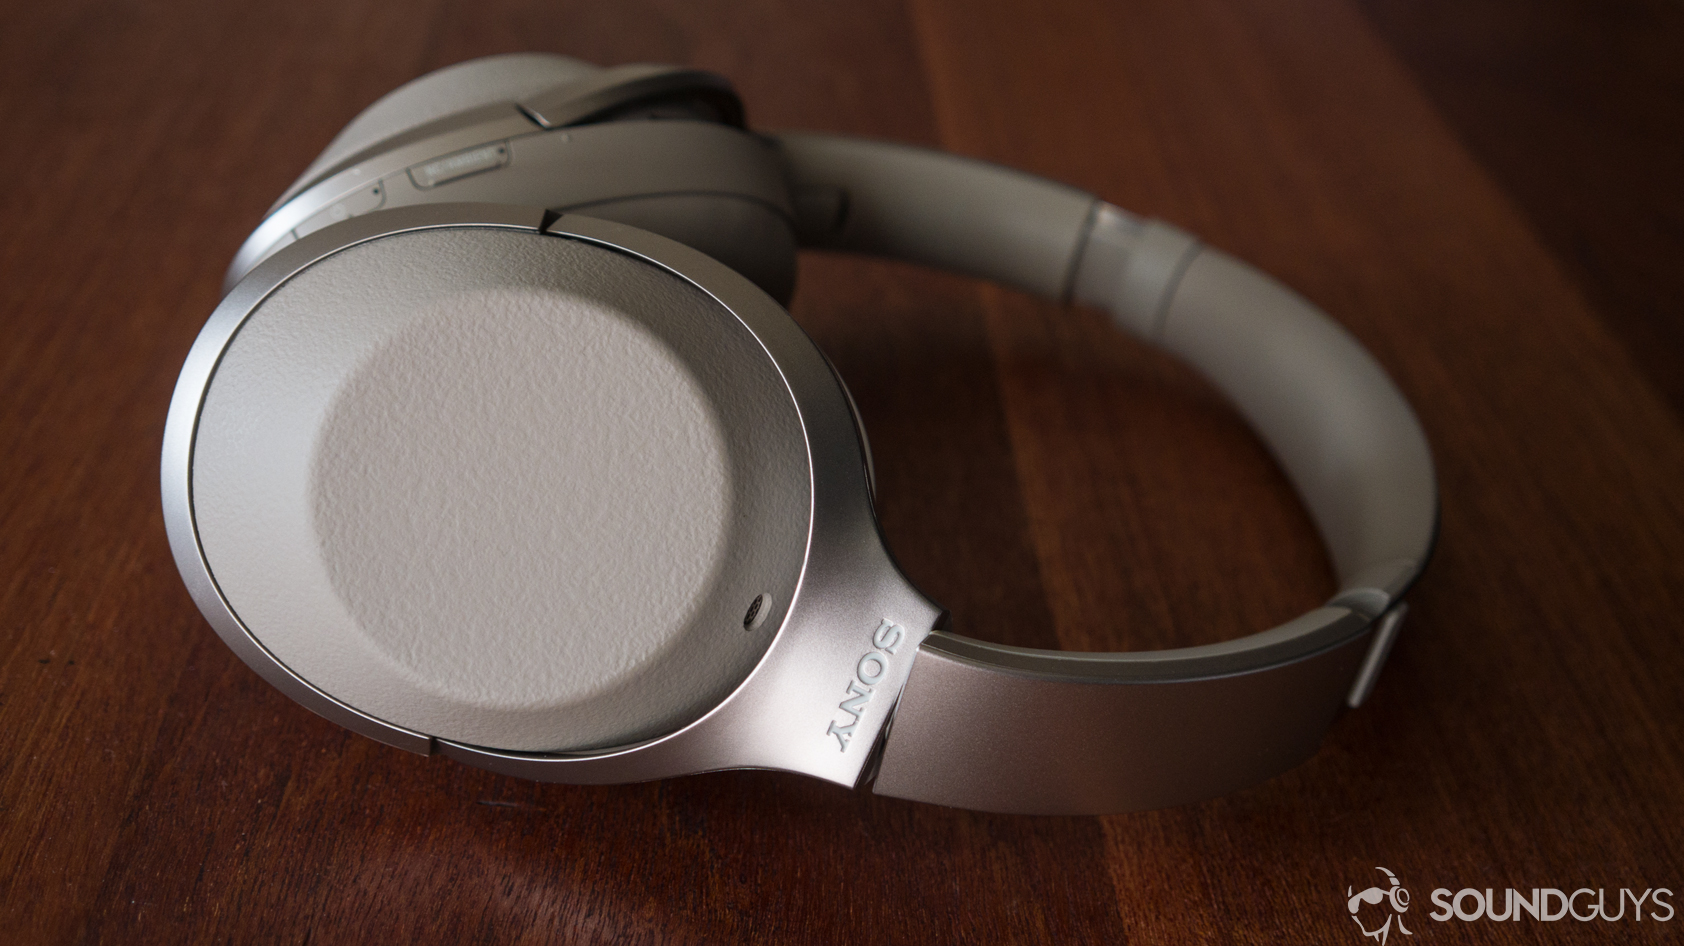 A photo of the Sony WH-1000X M2 wireless Bluetooth headphones on a table.